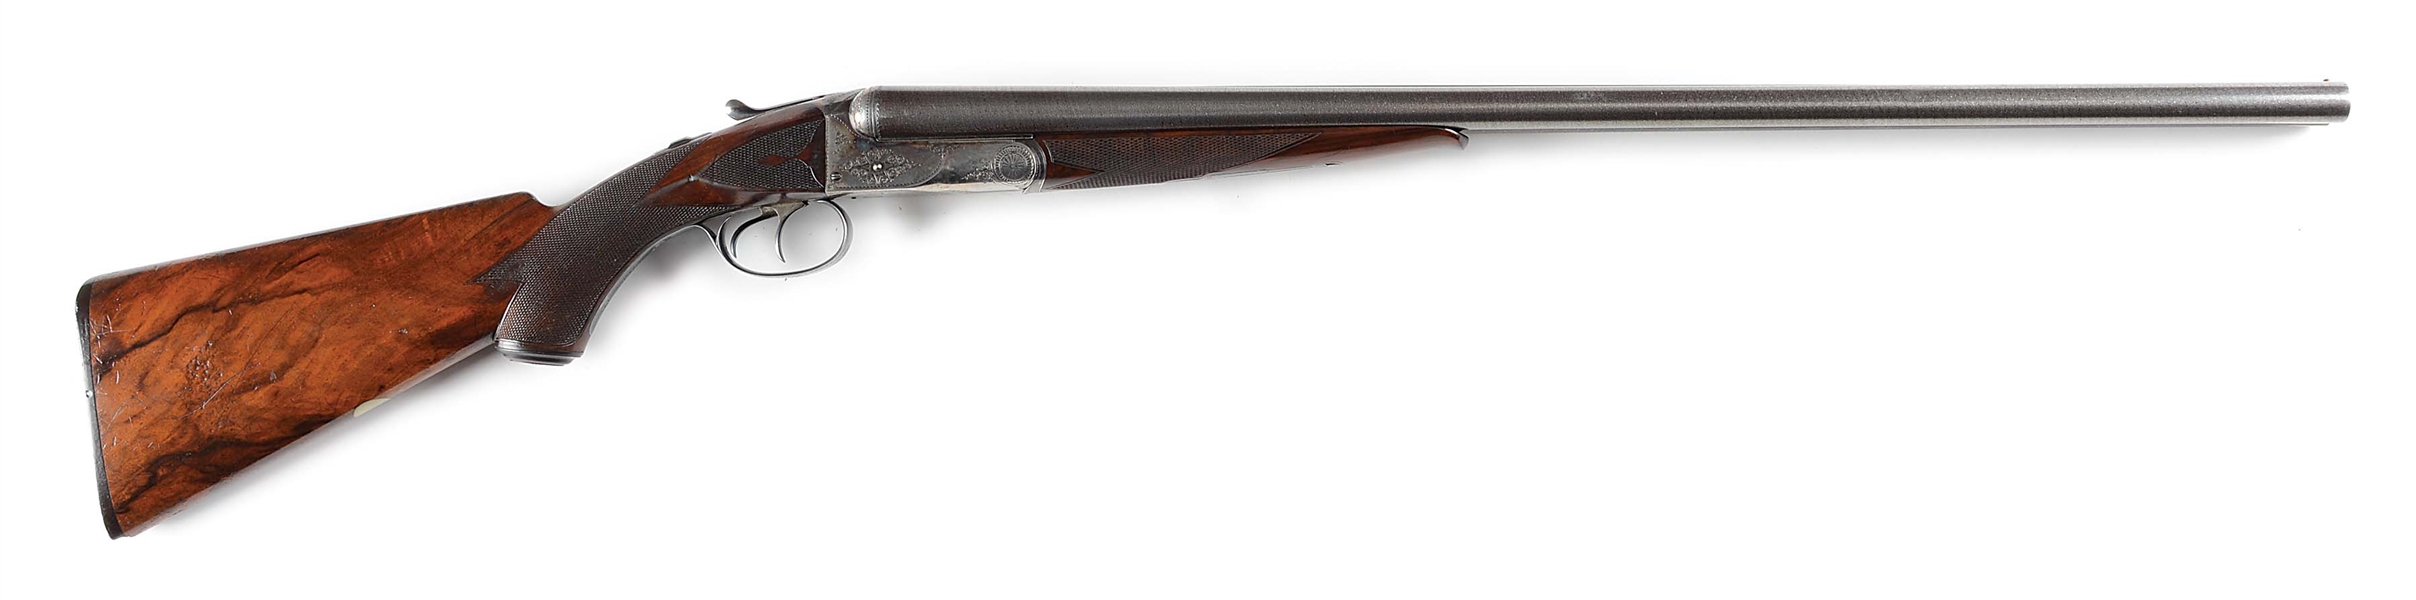 (A) SUPERB CONDITION, NICELY ENGRAVED COLT 1883 HAMMERLESS SHOTGUN WITH EXTRA BARRELS AND ORIGINAL WOODEN CARRYING BOX.